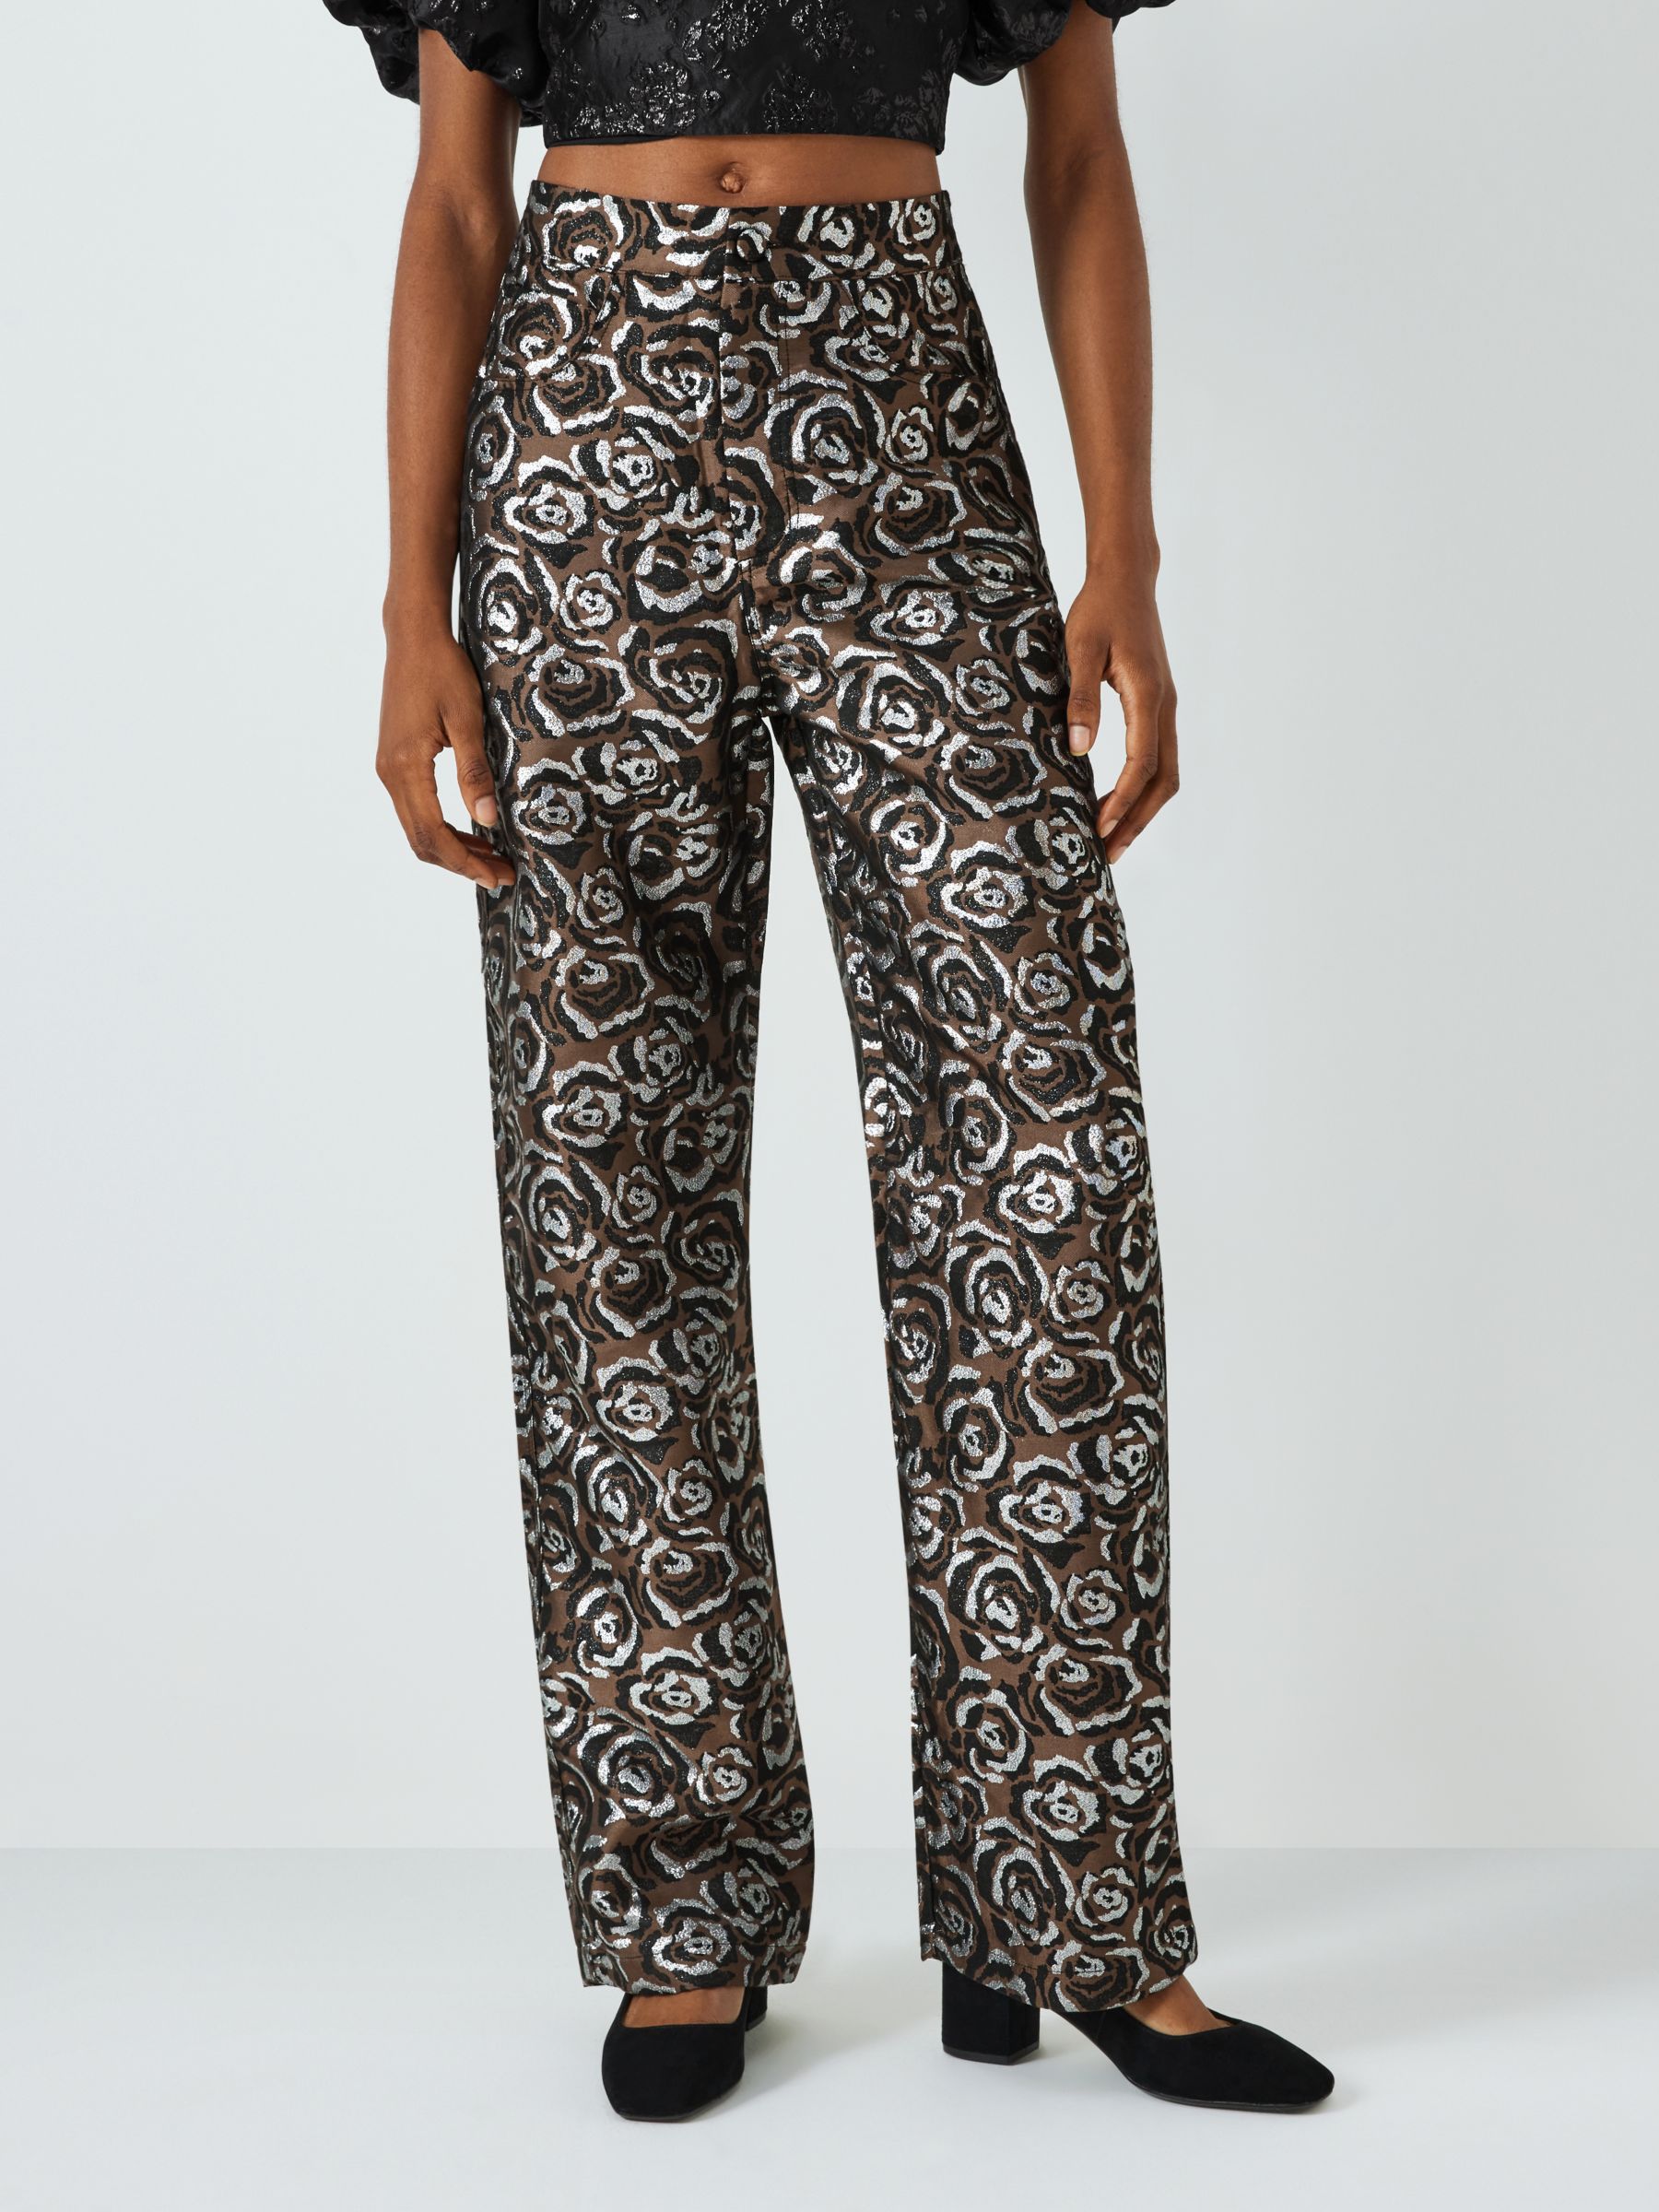 Patterned & Printed Trousers, Animal, Leopard & Snake Print Trousers